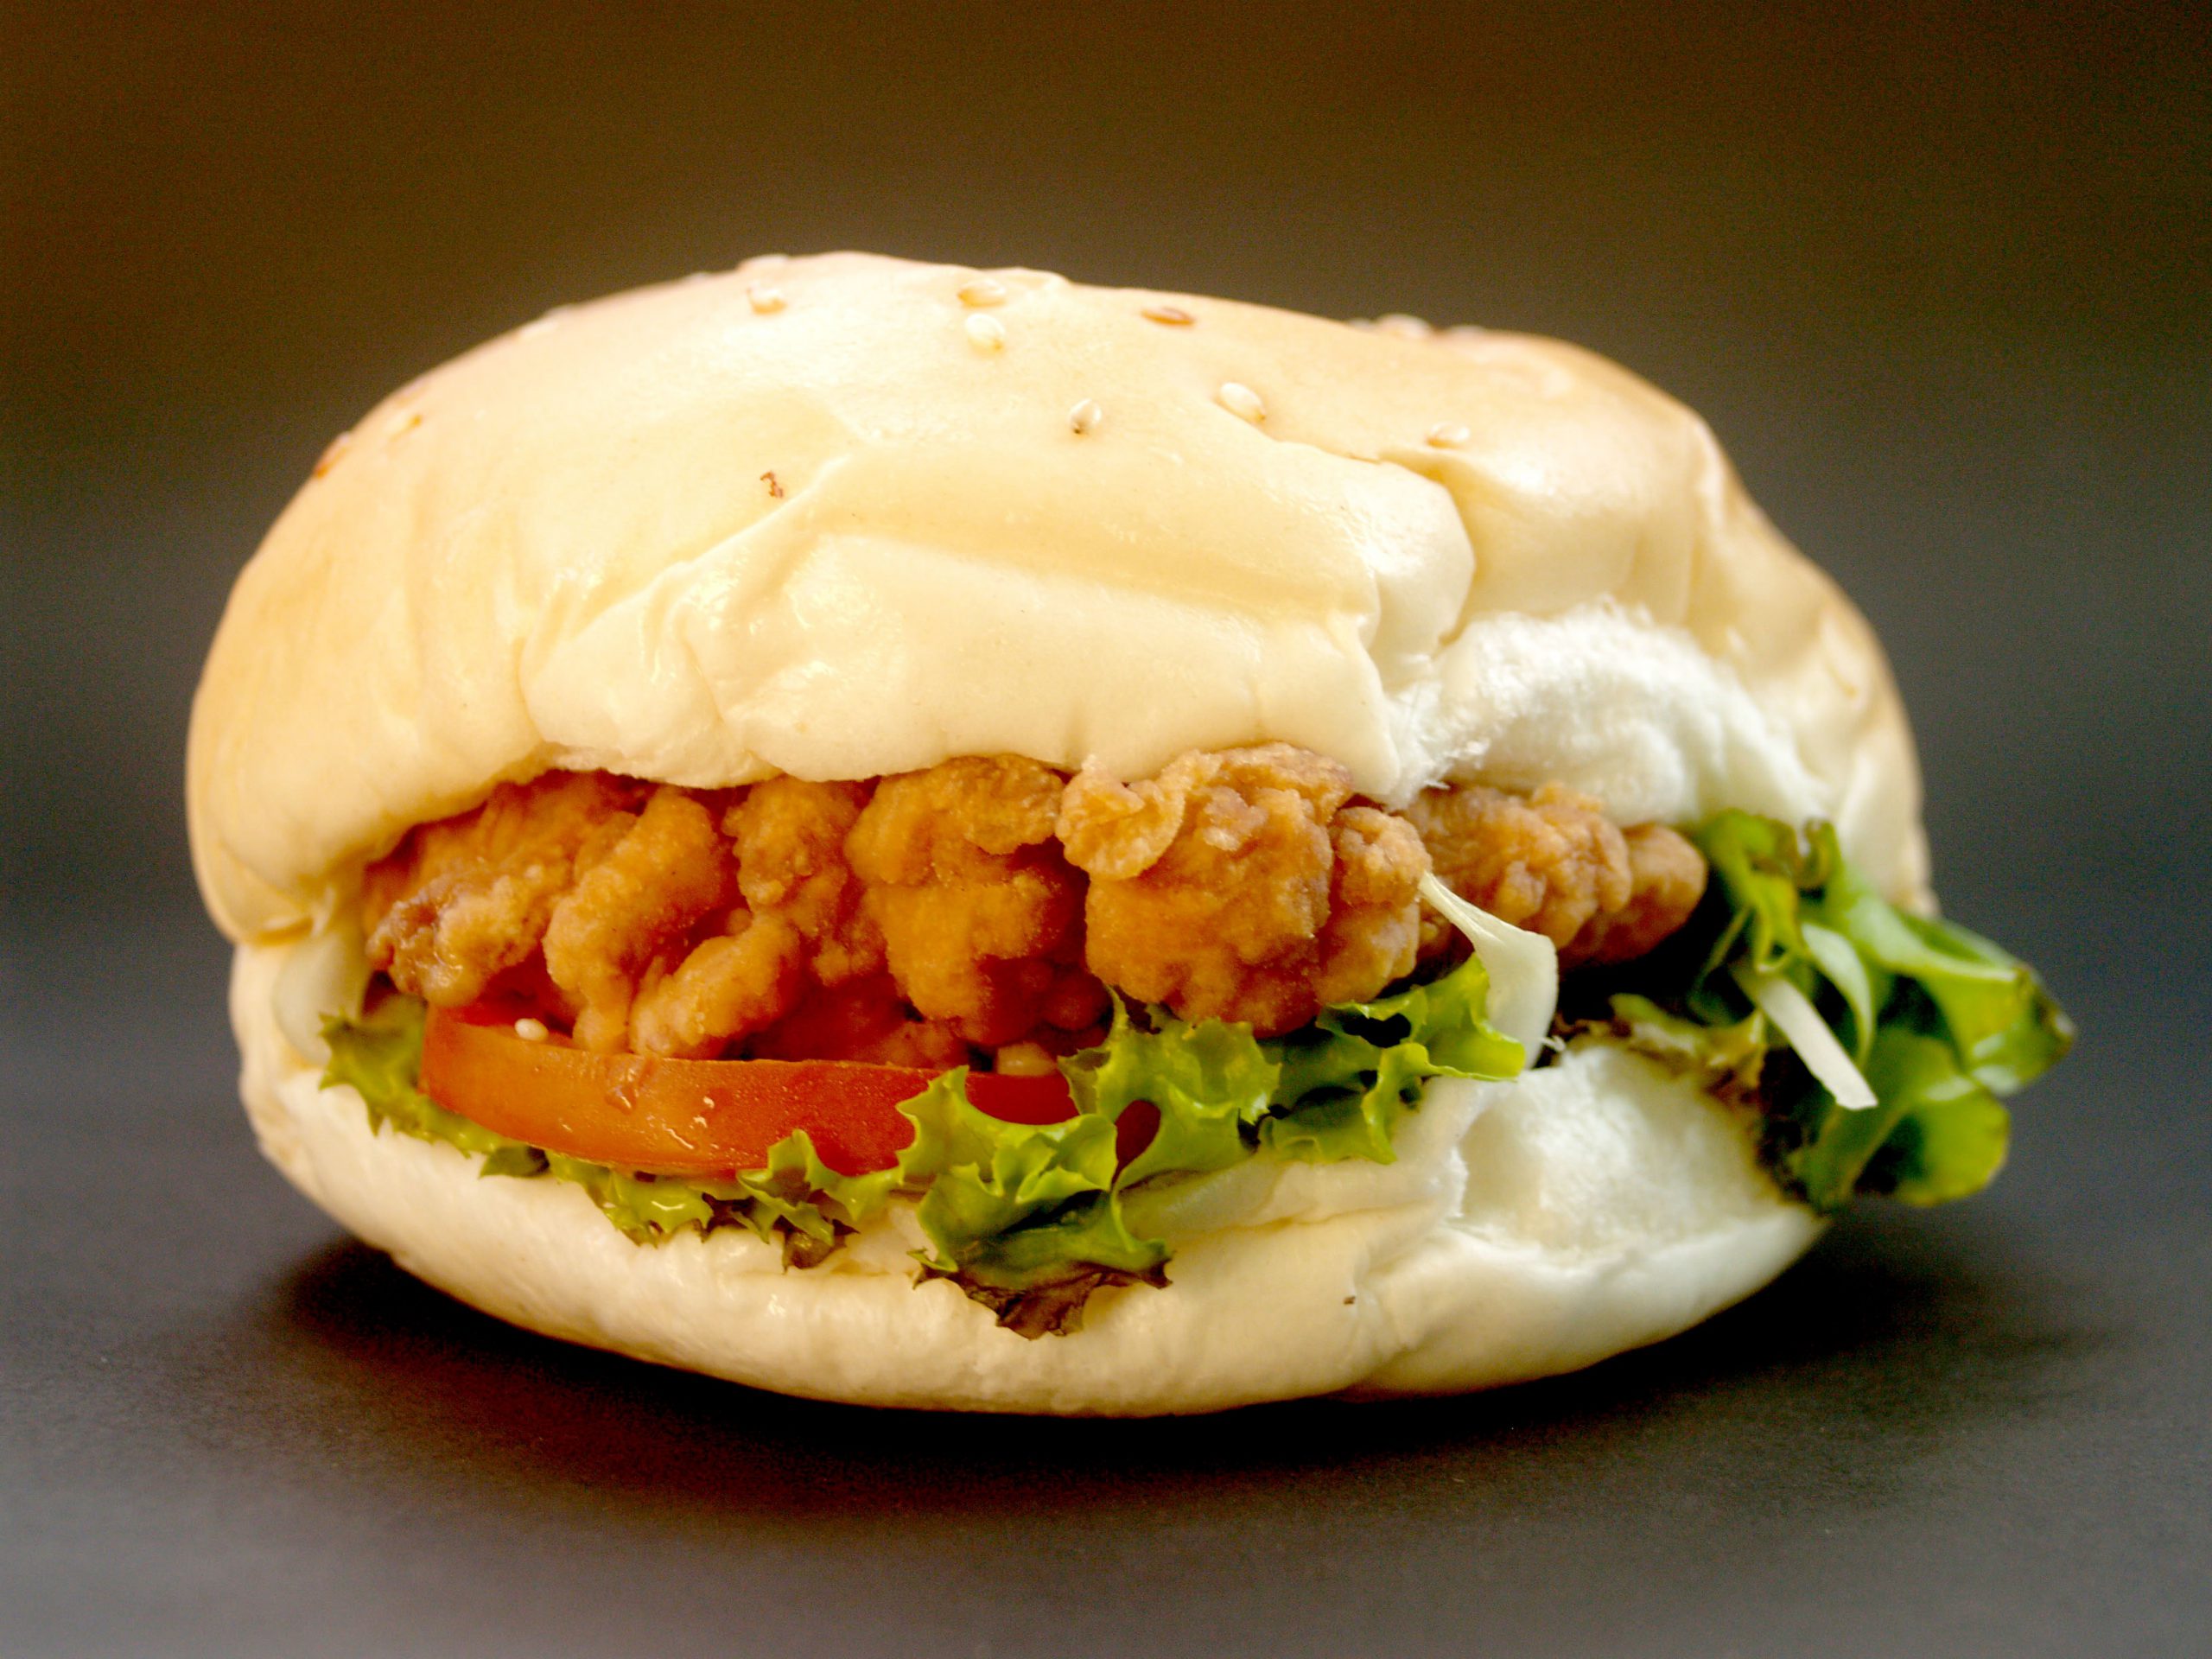 A chicken sandwich (general photo, not specific to CFA)